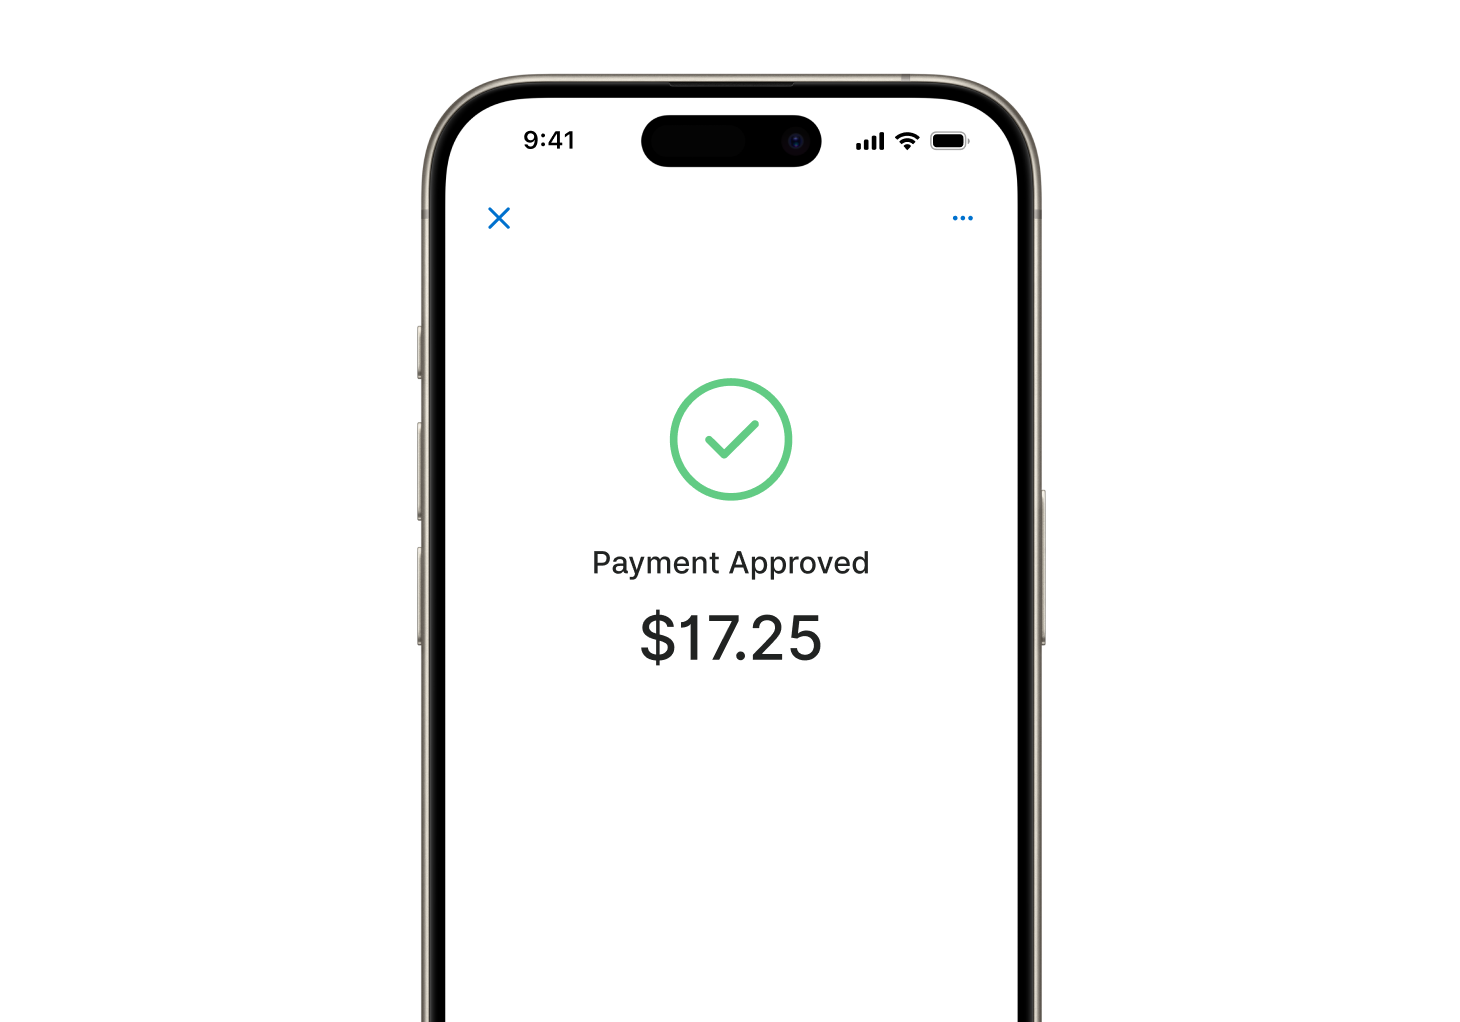 X-2310-Tap-to-Pay-on-iPhone-Payment-Approved-v2